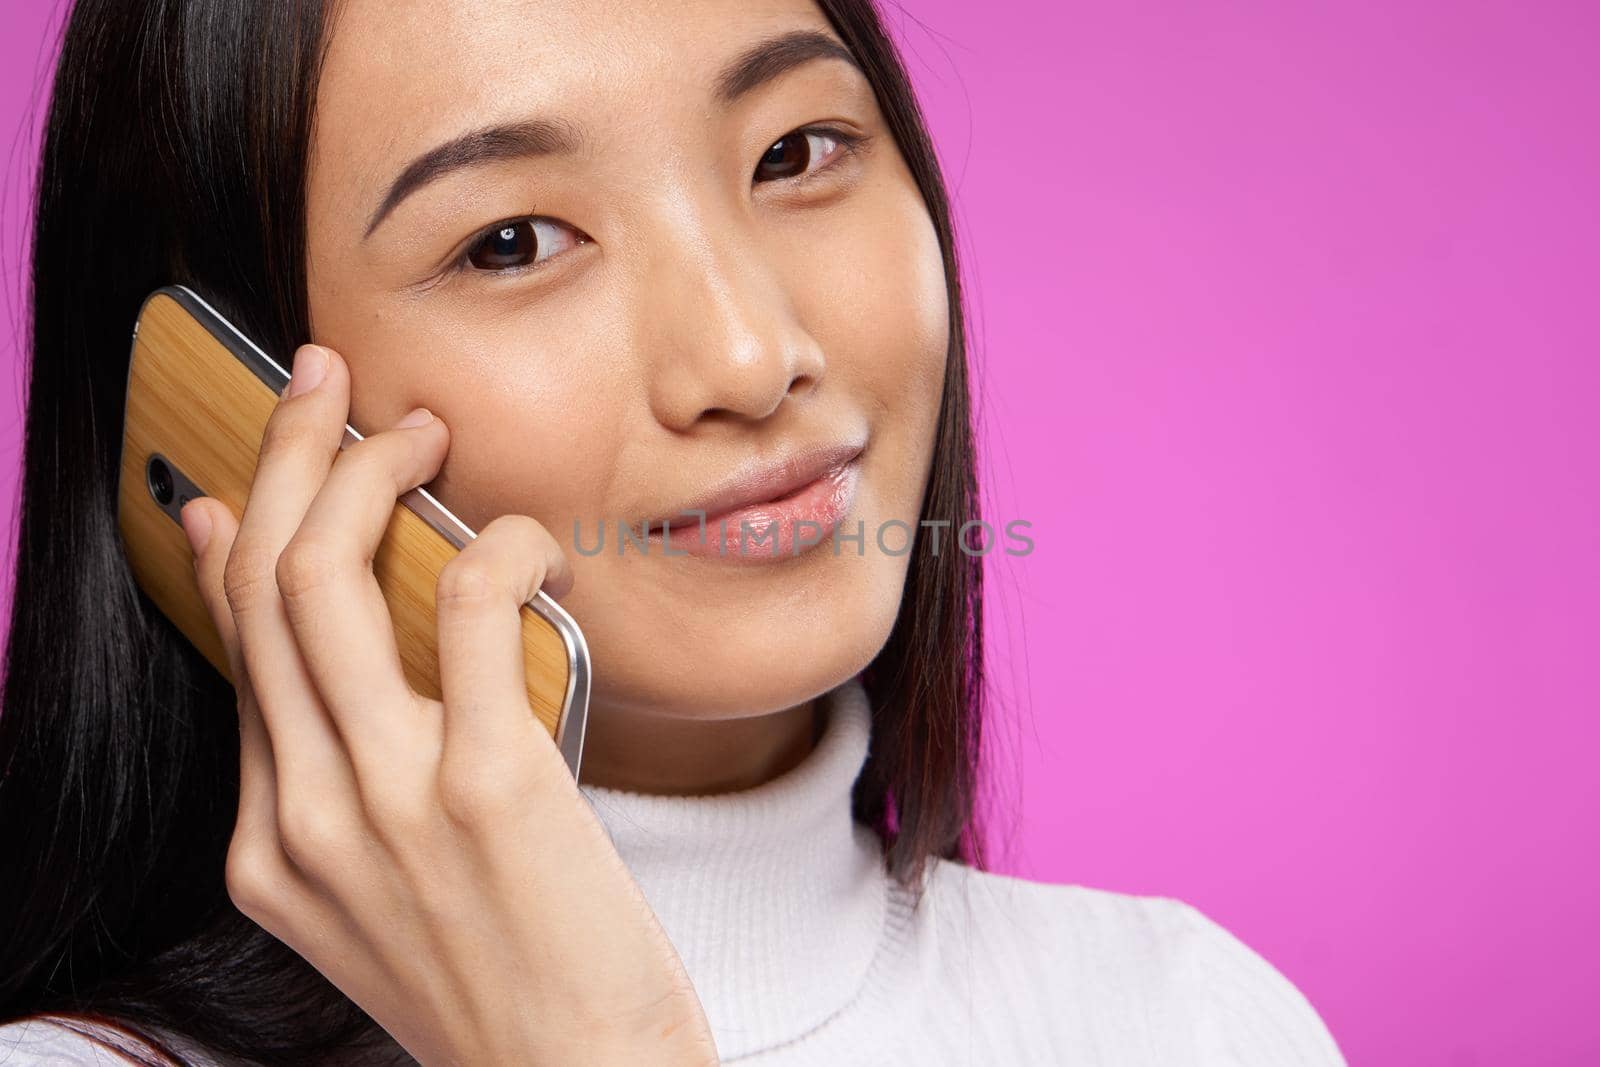 woman asian appearance phone close-up smile pink technology background by SHOTPRIME